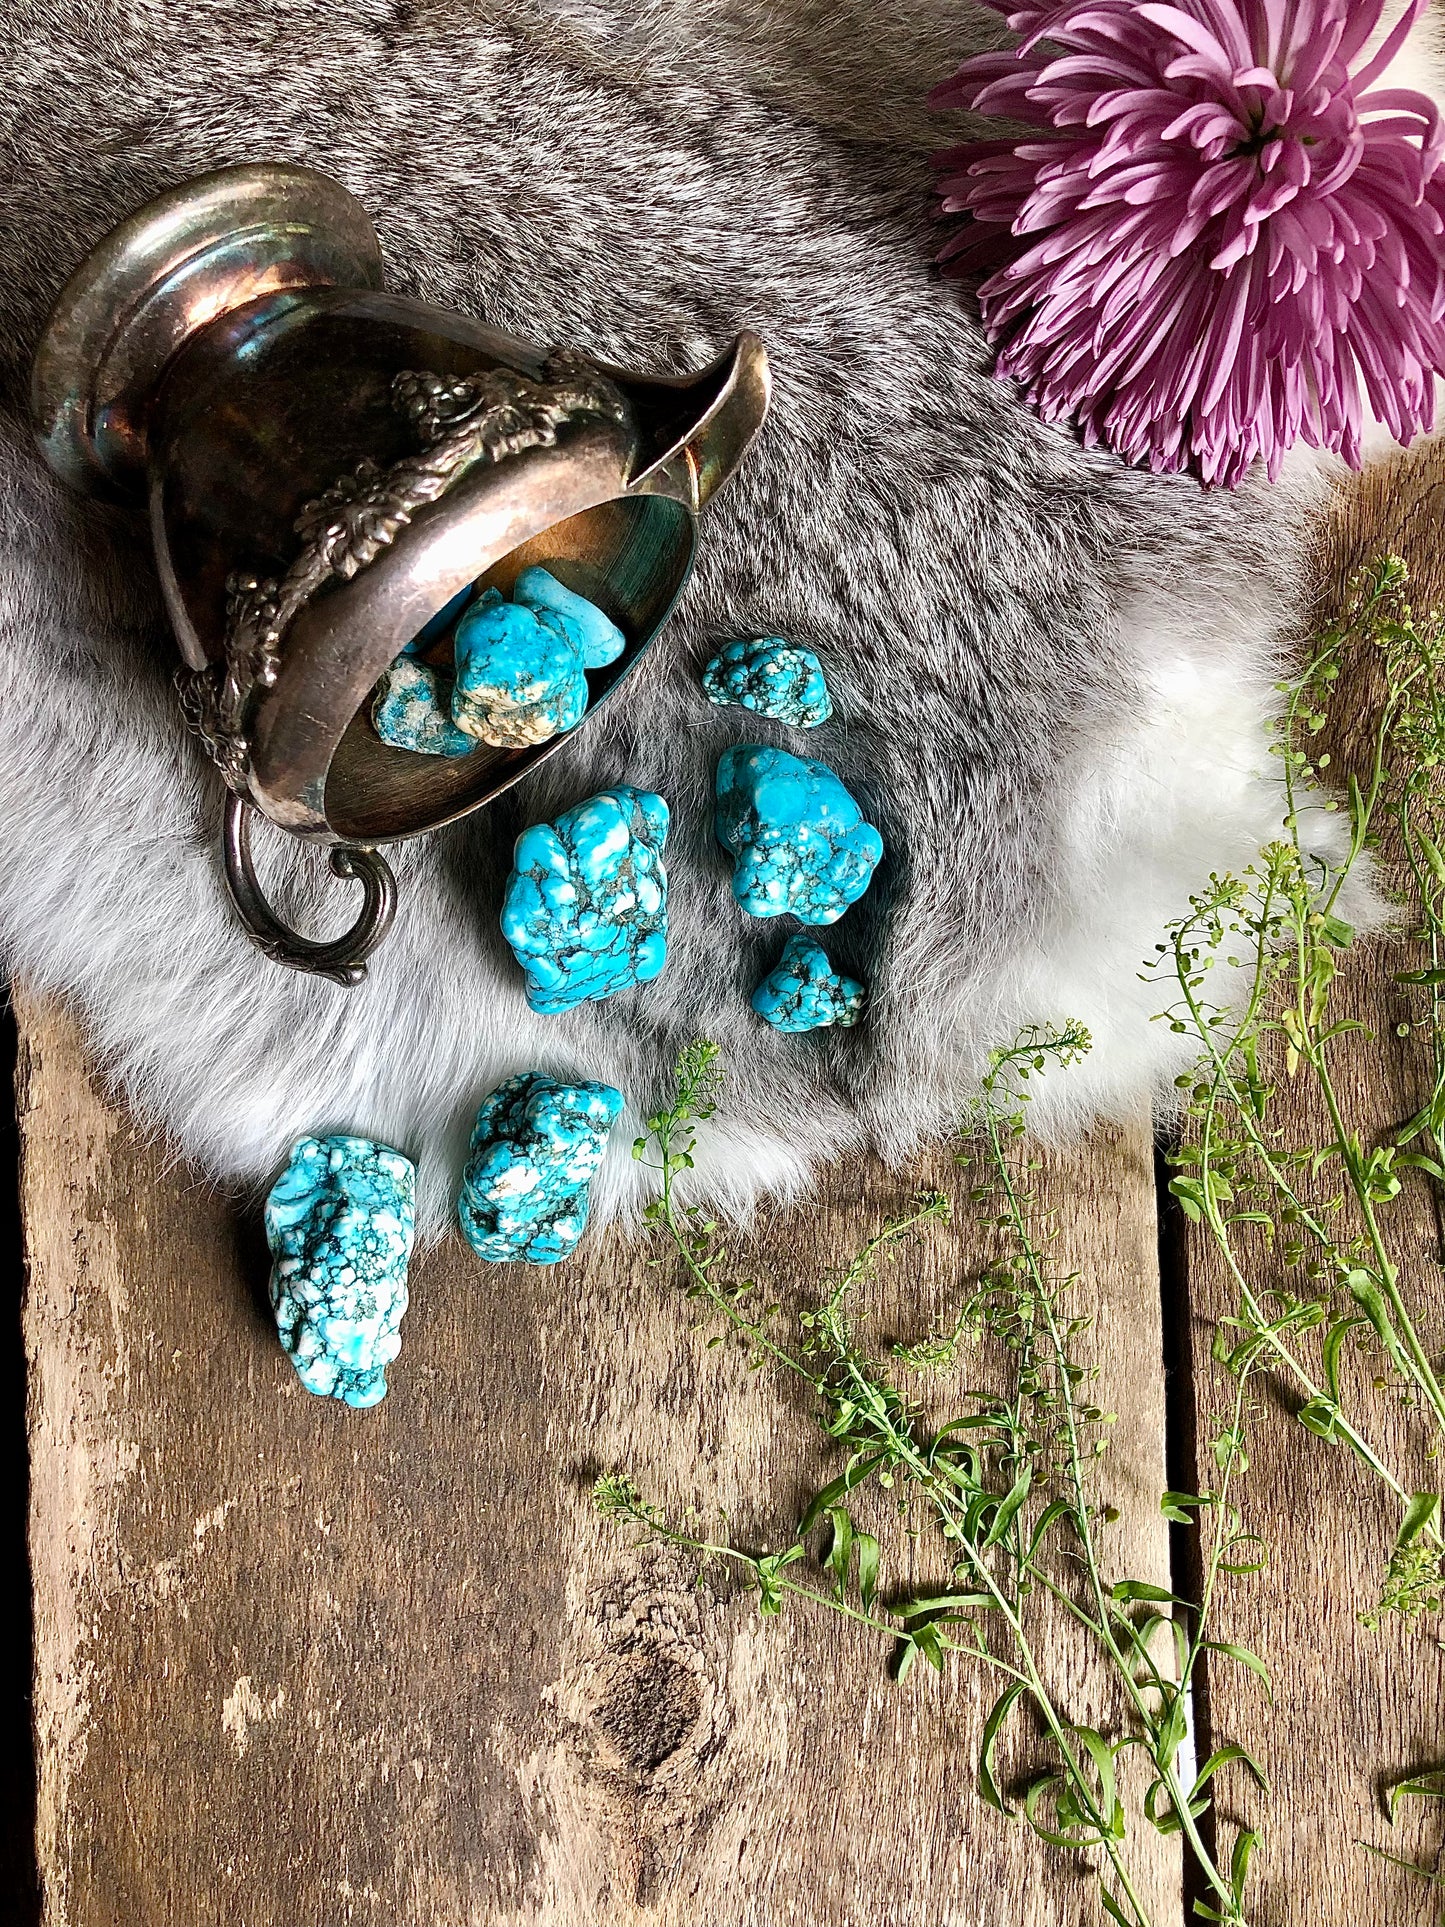 Large turquoise dyed howlite crystals spill out of vintage silver bowl onto fur, aged wood and pretty flowers